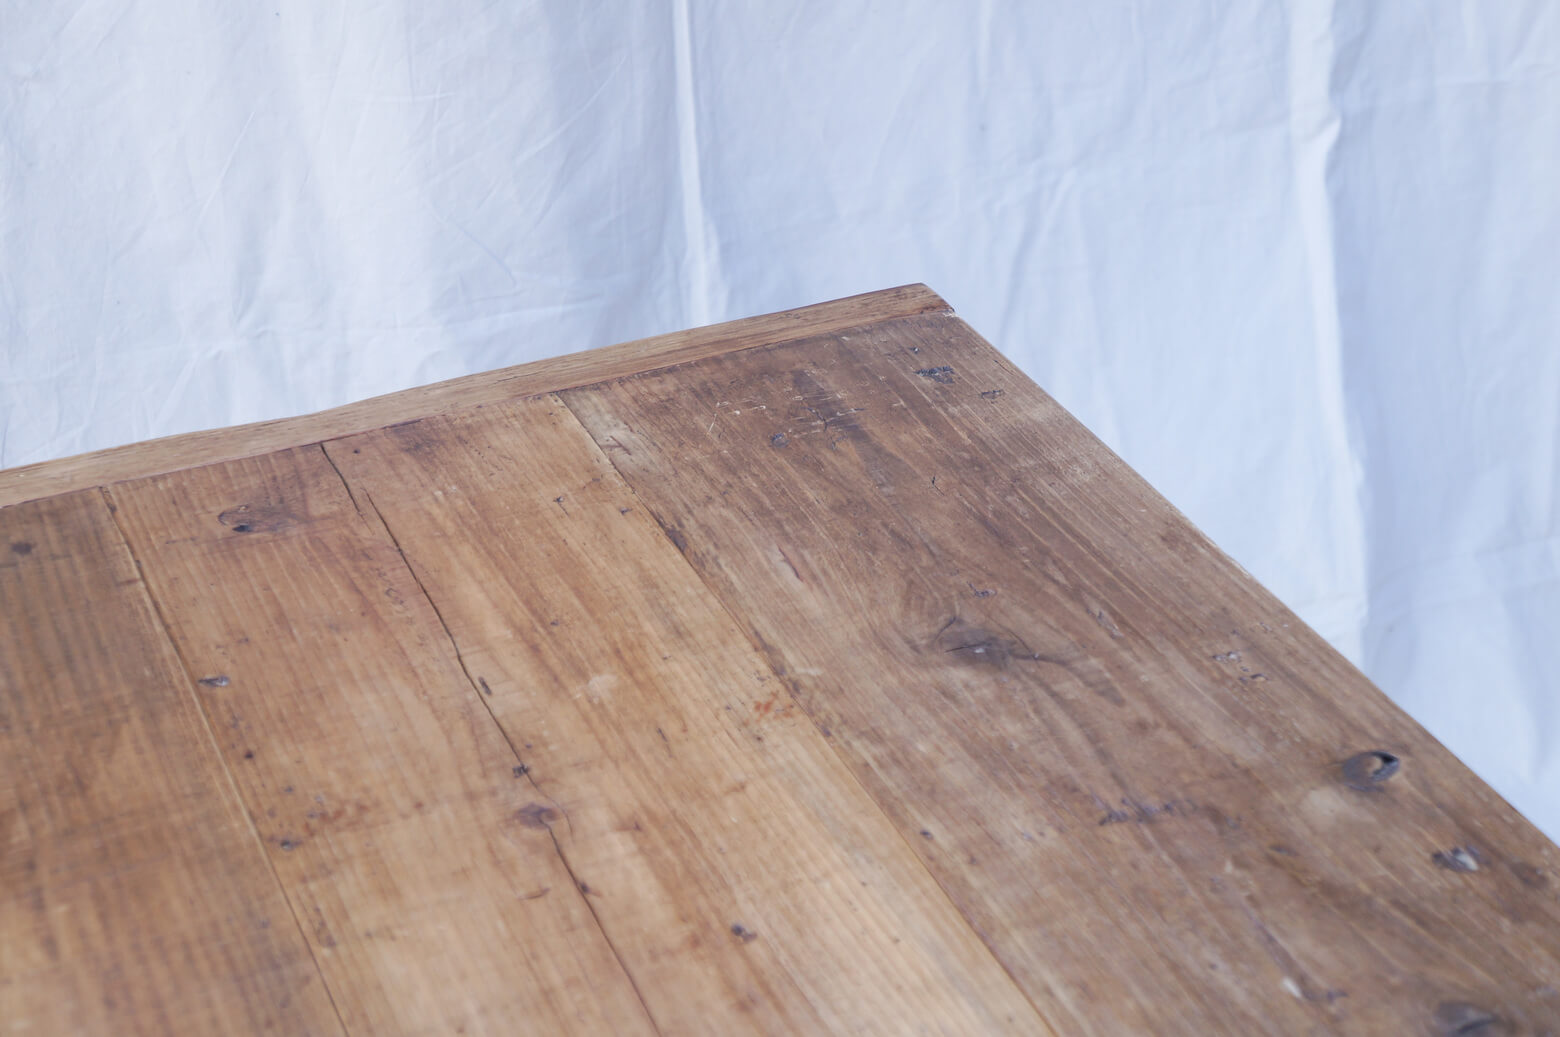 GALLUP Antique Wood Remake Cafe Table/ギャラップ 古材 リメイク カフェテーブル